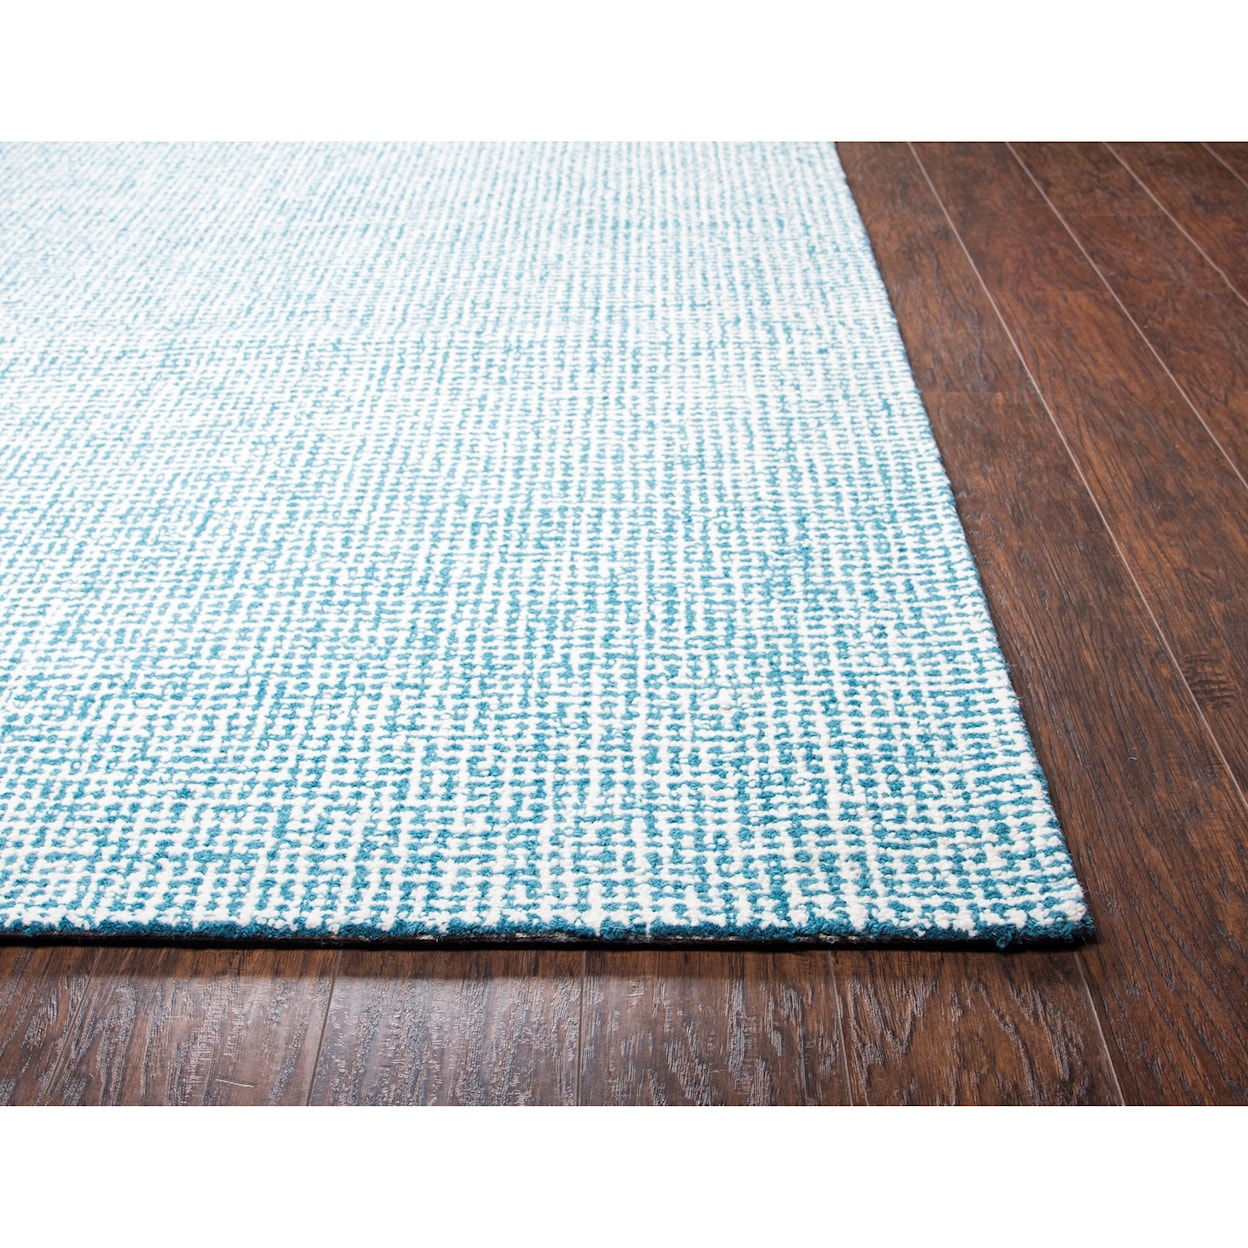 Rizzy Home Brindleton 3' x 5' Rectangle Rug